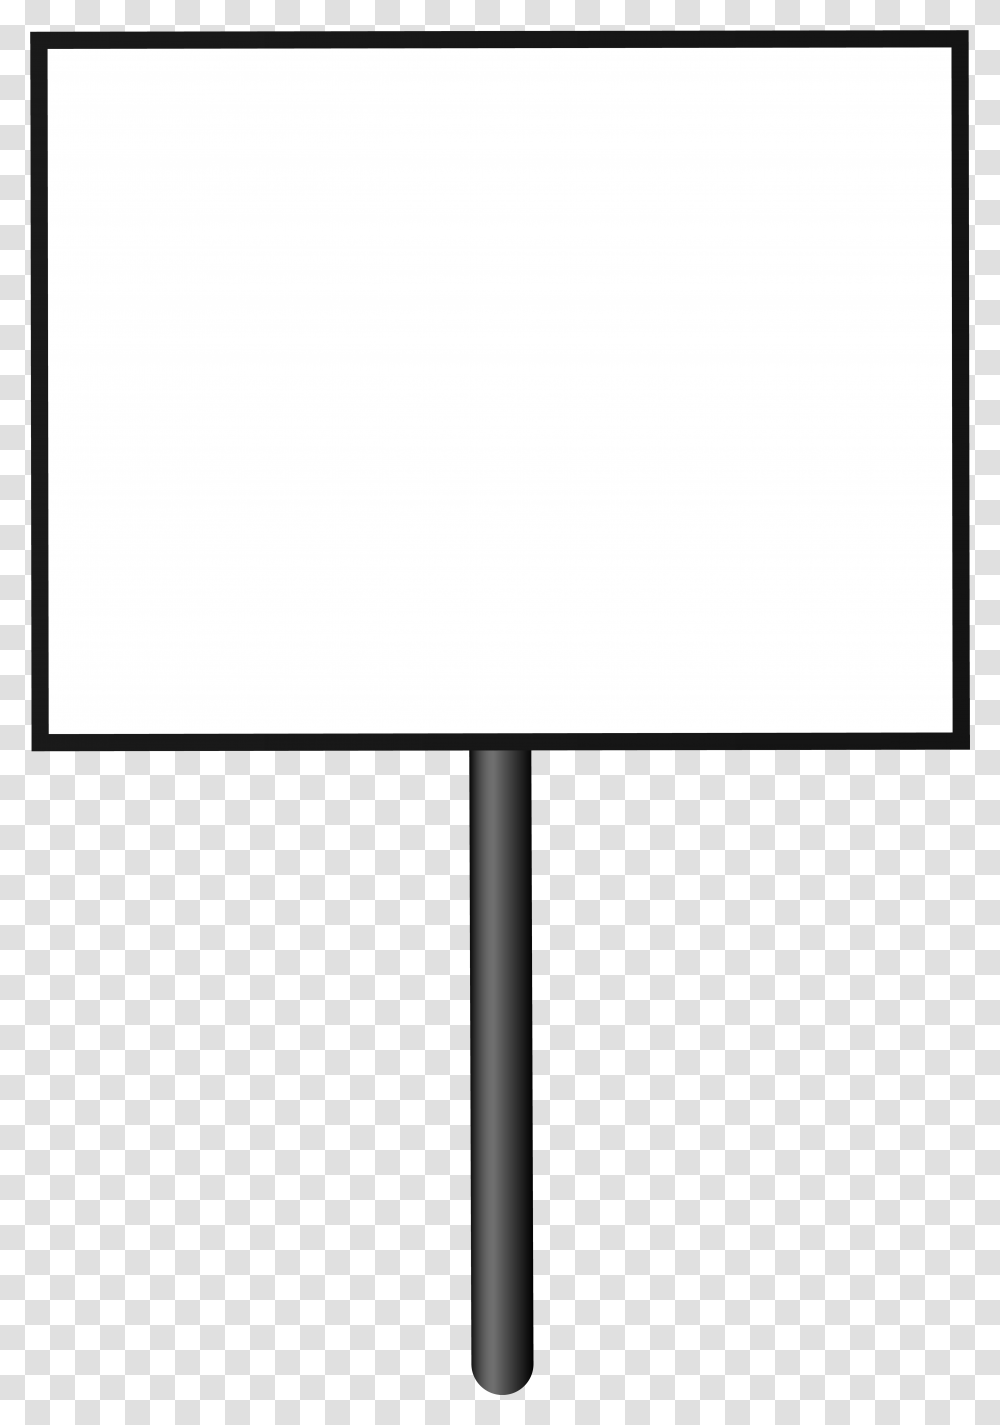 Clip Art Board Image Gallery Yopriceville Blank Sign Board, Screen, Electronics, Projection Screen, Monitor Transparent Png